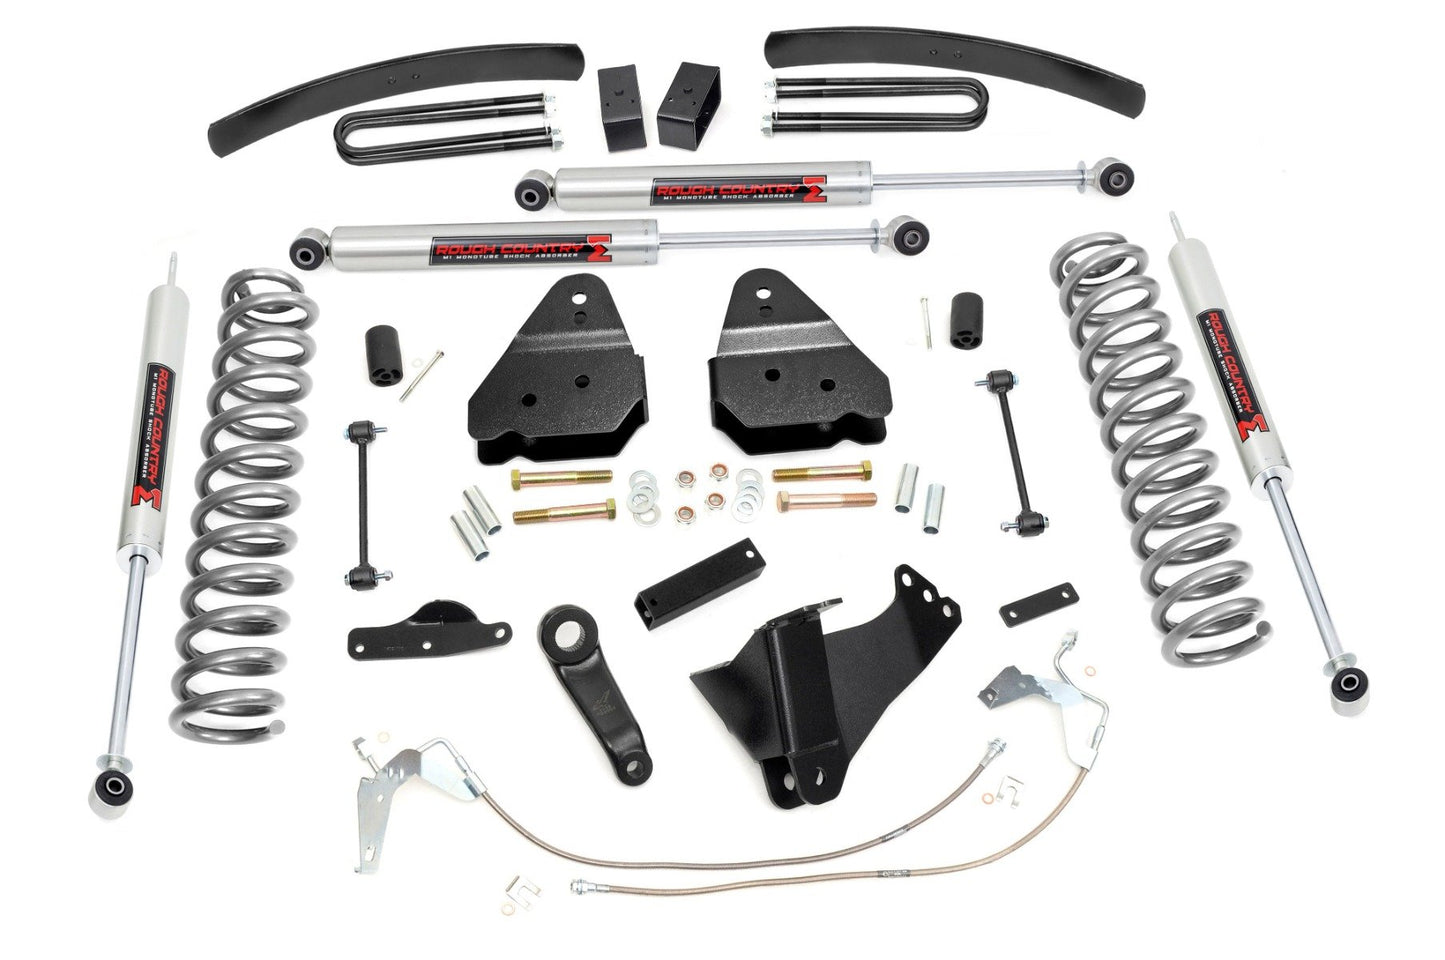 Rough Country (59740) 6 Inch Lift Kit | Gas | M1 | Ford F-250/F-350 Super Duty 4WD (2008-2010)